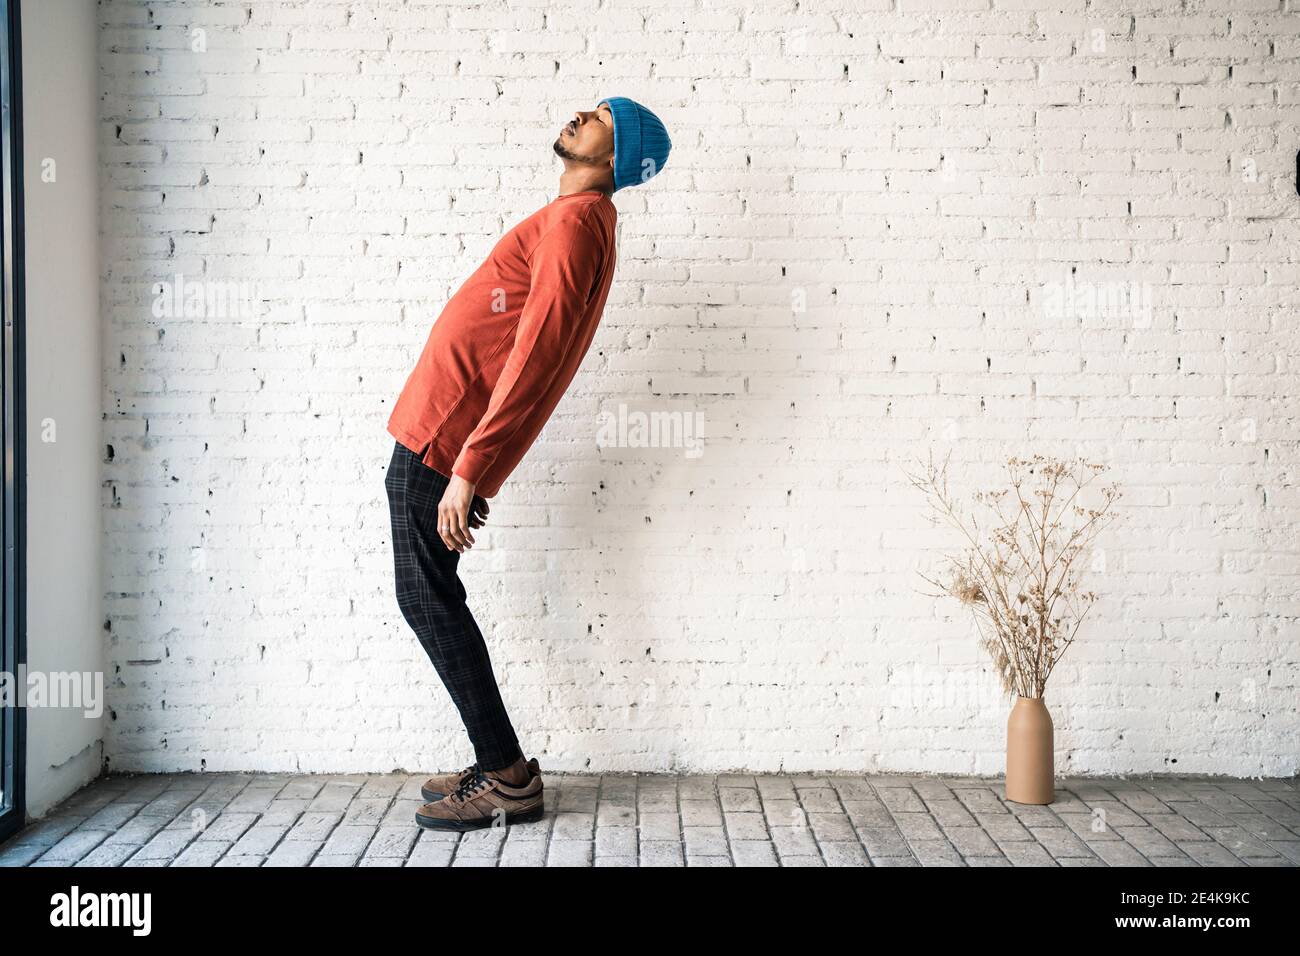 Man with eyes closed bending backwards against white brick wall Stock Photo